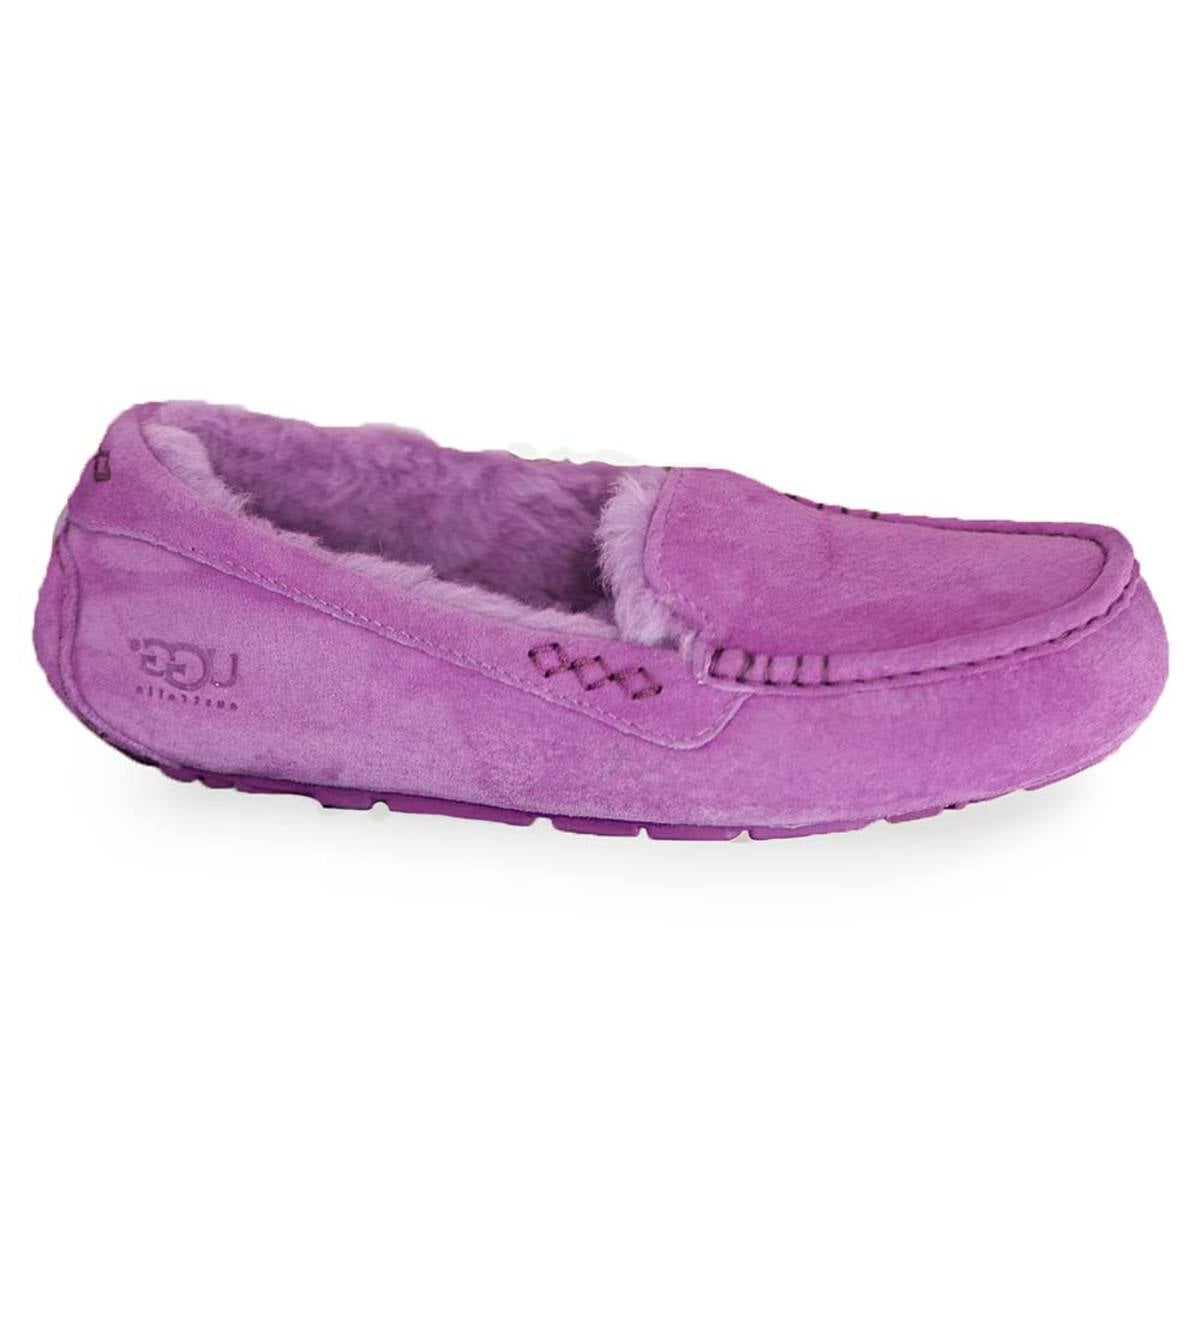 UGG Ansley Moccasin Slippers - Crazy Plum - Size 7